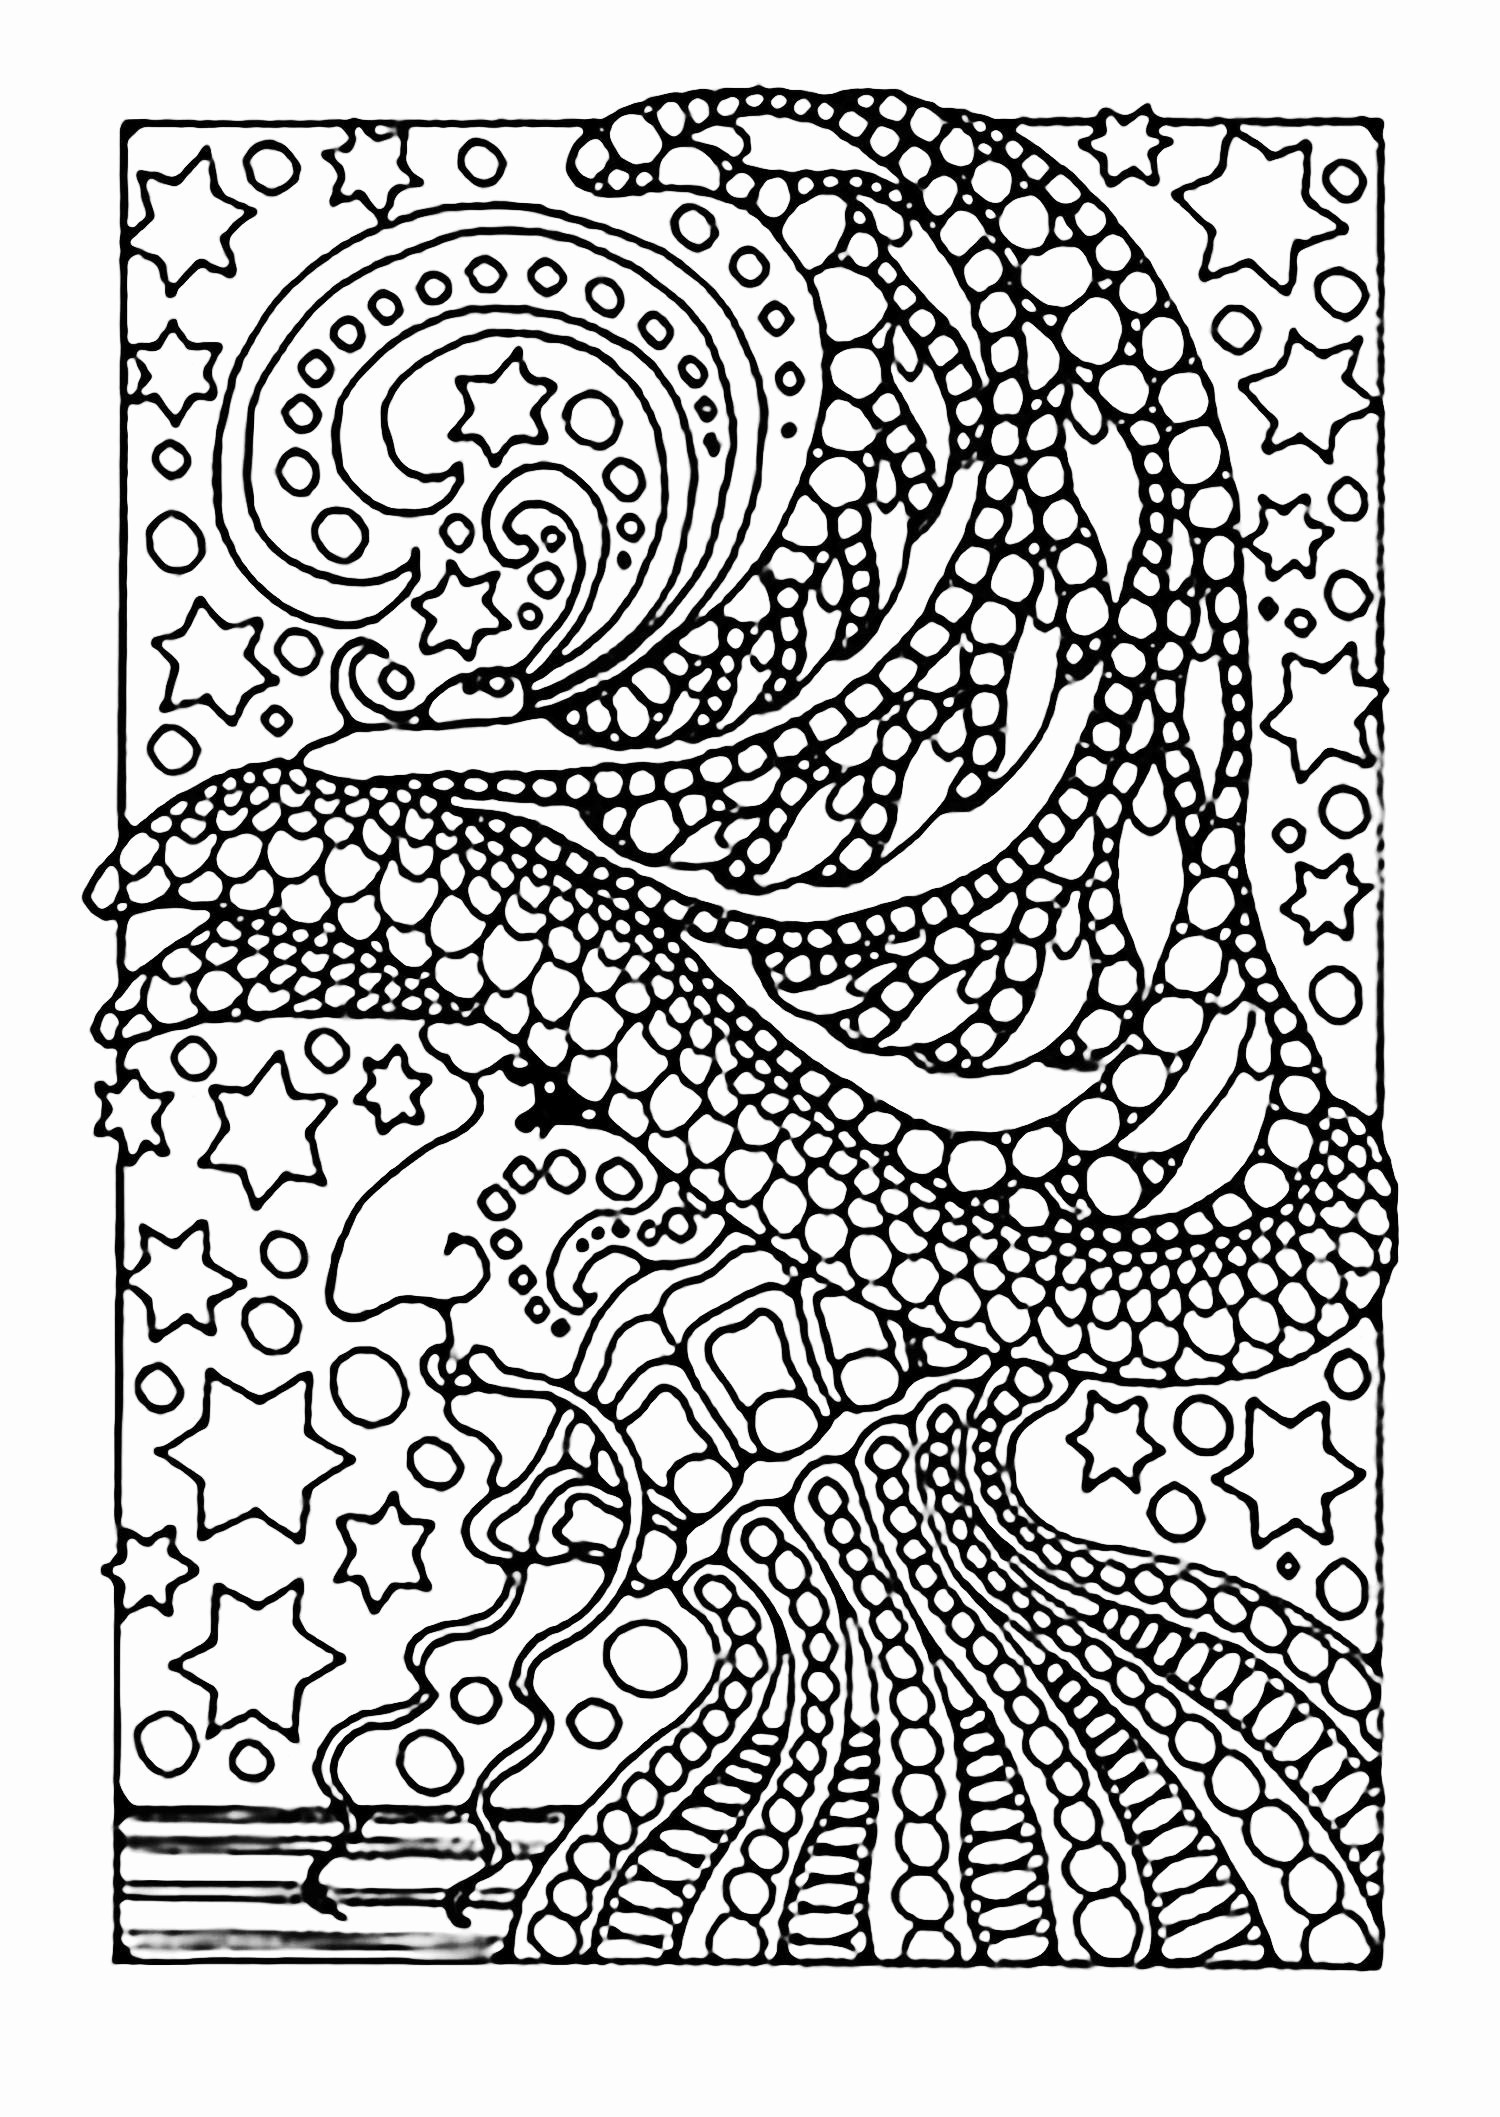 29 Great Seashells In Glass Vase 2024 free download seashells in glass vase of lovely mess free coloring for toddlers coloring pages for cool coloring page unique witch coloring pages new crayola pages 0d